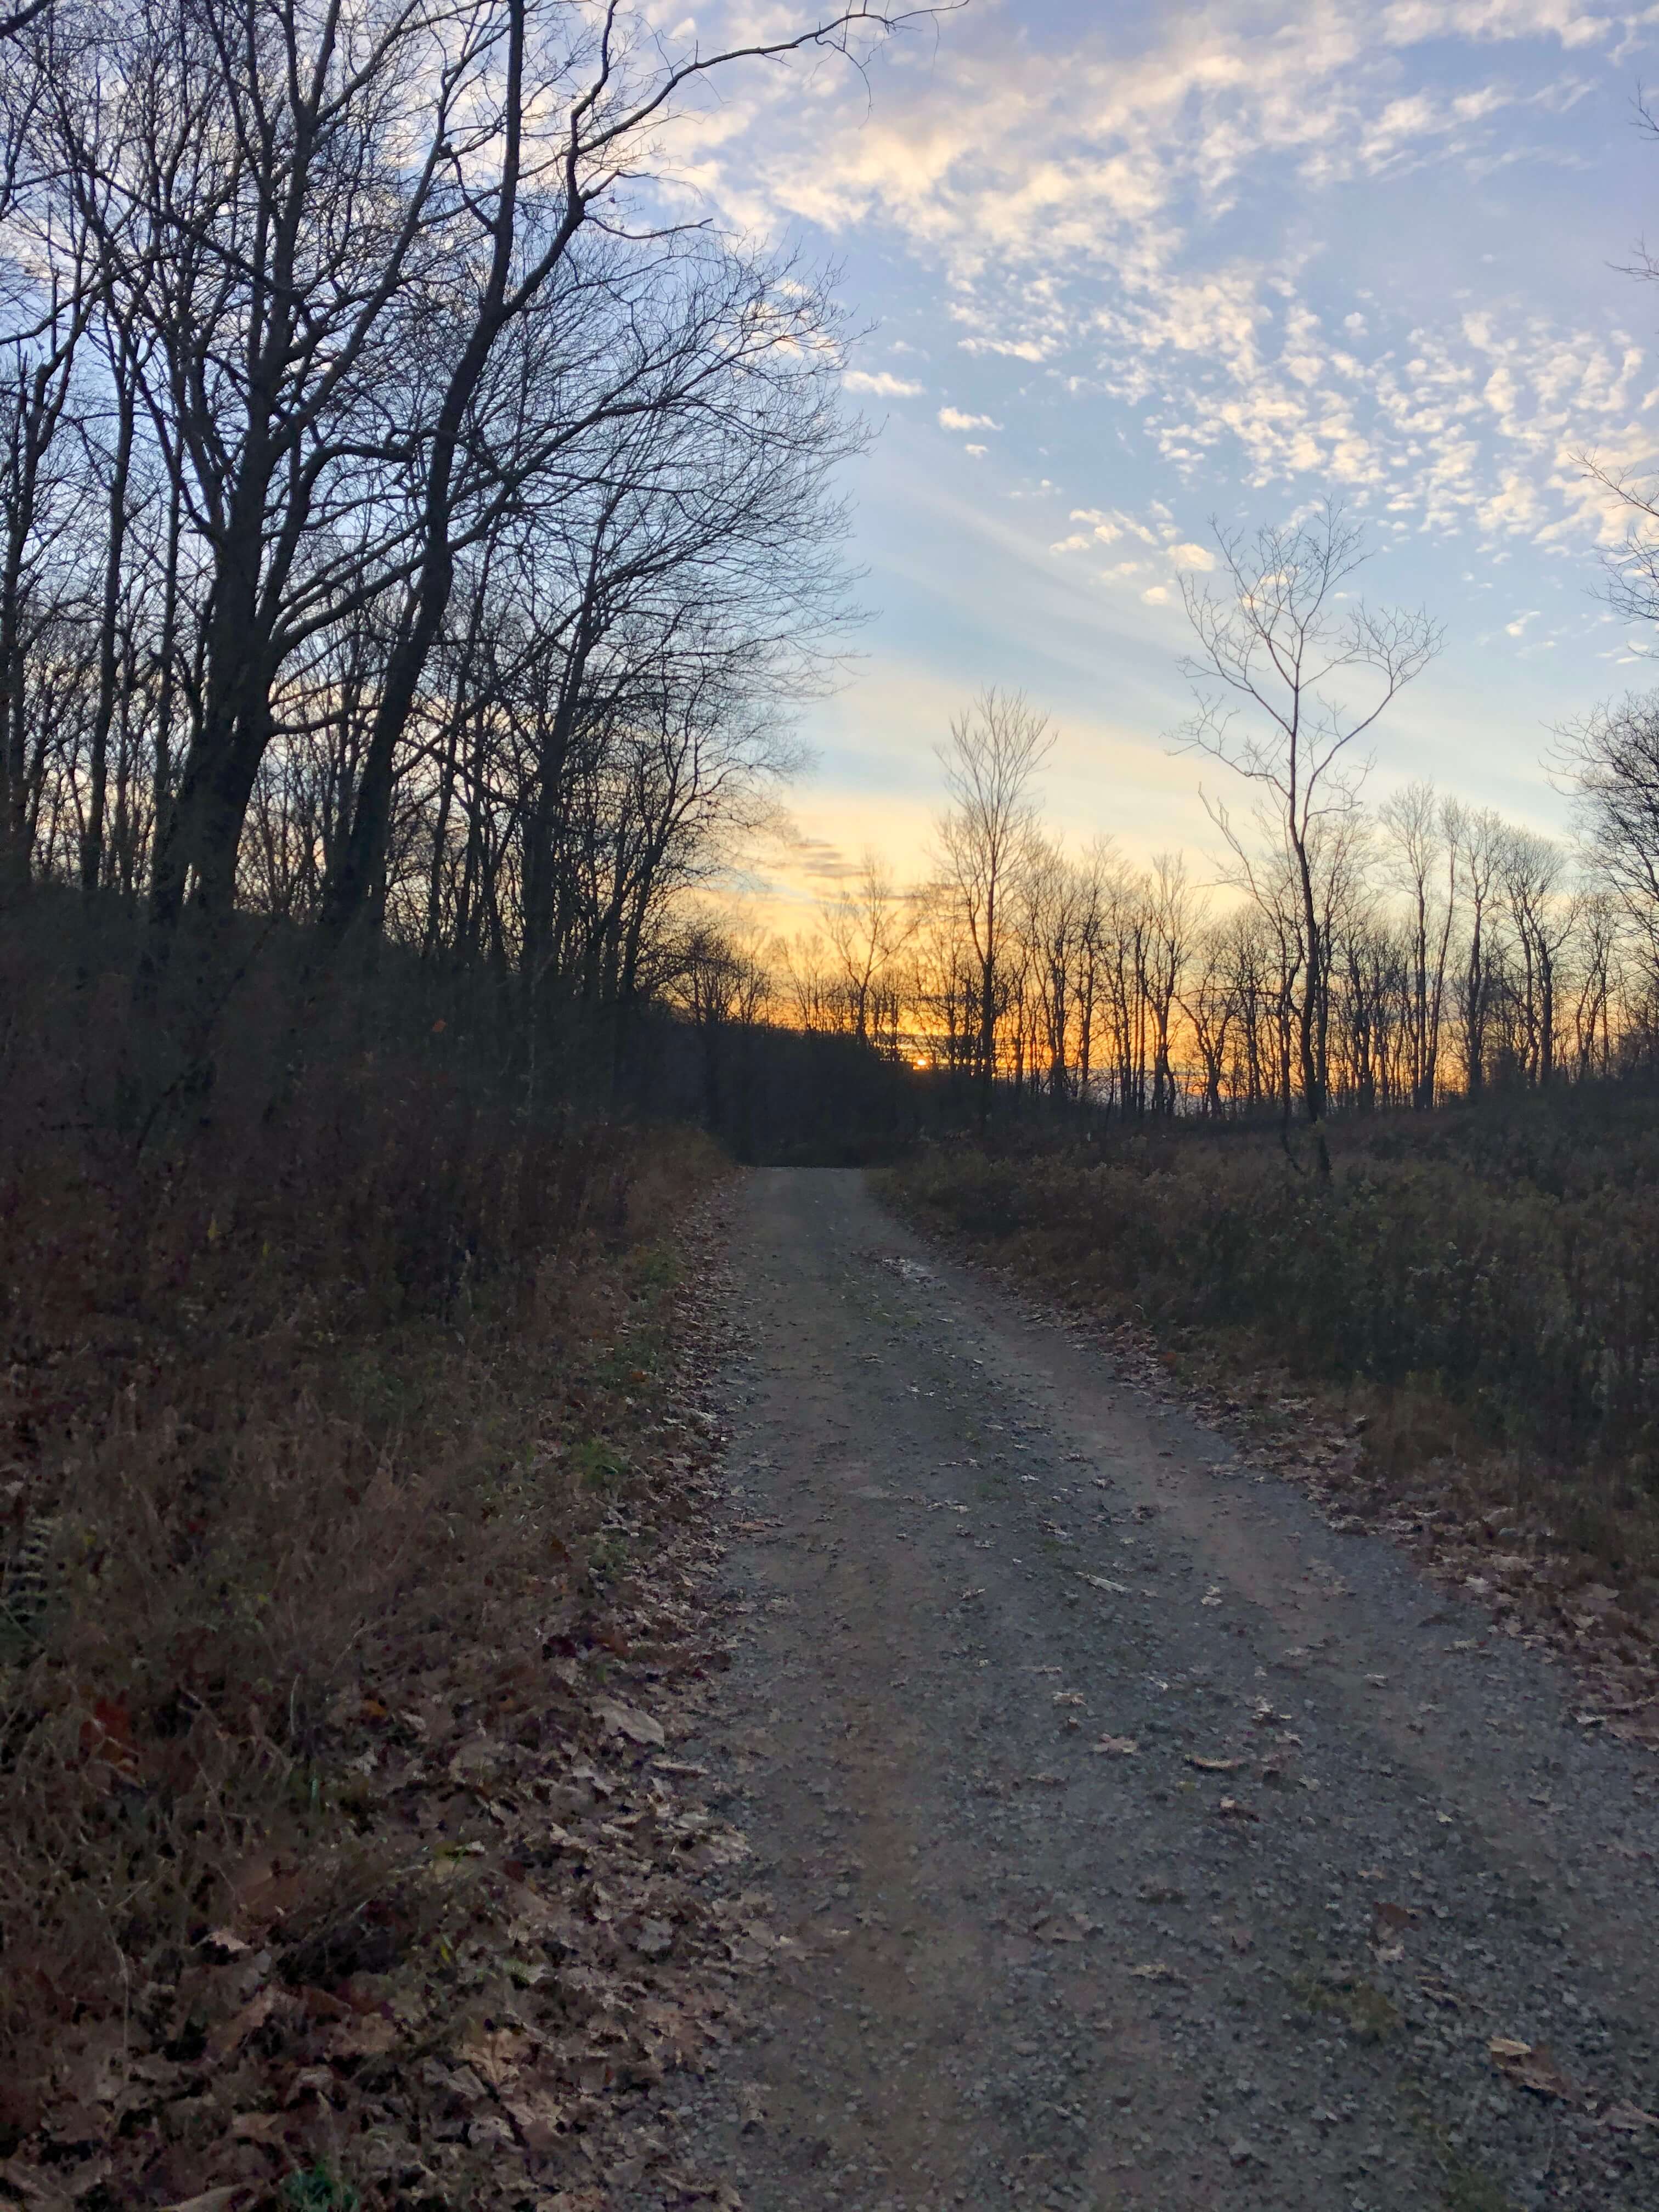 Laurel Highlands Gravel Routes Collection - Camp Run Road Sunset